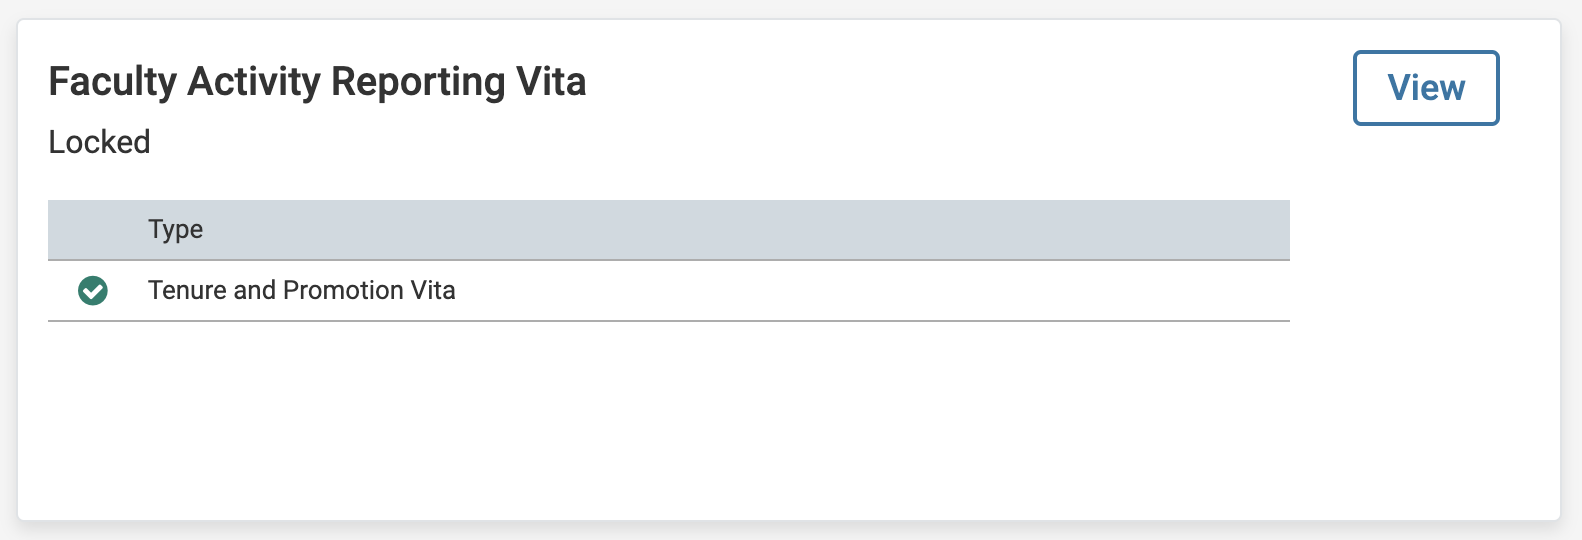 Faculty Activity Reporting Vita section with View button